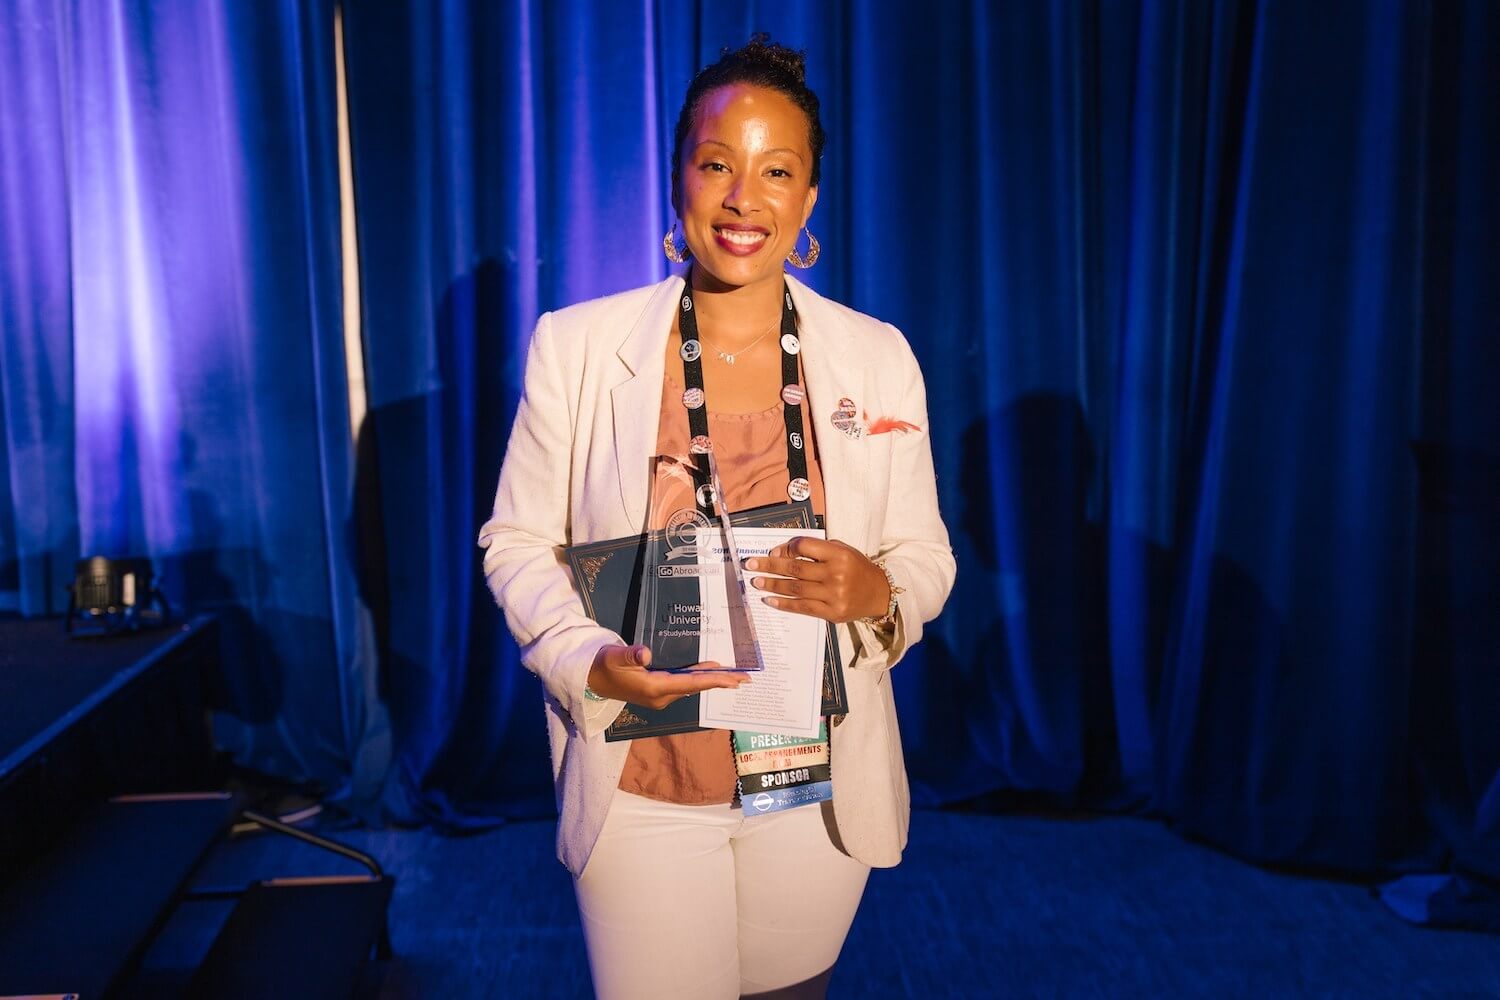 Study Abroad Manager at the Ralph J. Bunche International Affairs Center, MaRaina Montgomery, receiving the Innovation in Diversity Award” - courtesy of GoAbroad.com_. .jpg